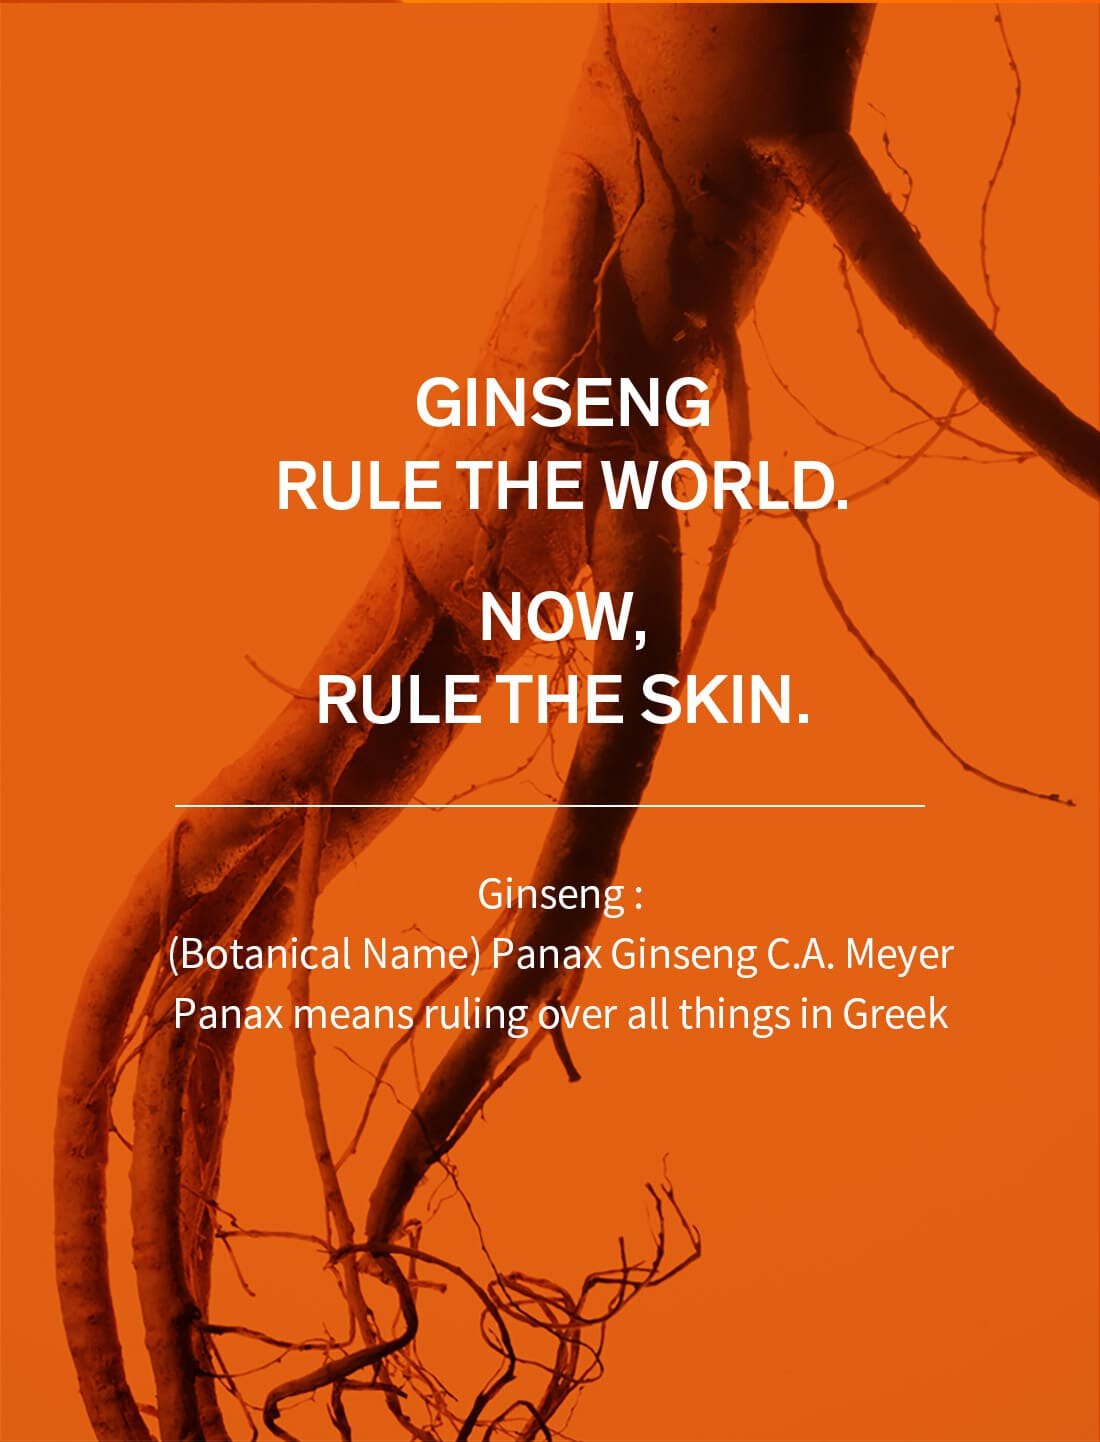 ginseng rule the world.now, rule the skin.Ginseng : (Botanical Name) Panax Ginseng C.A. Meyer Panax means ruling over all things in Greek